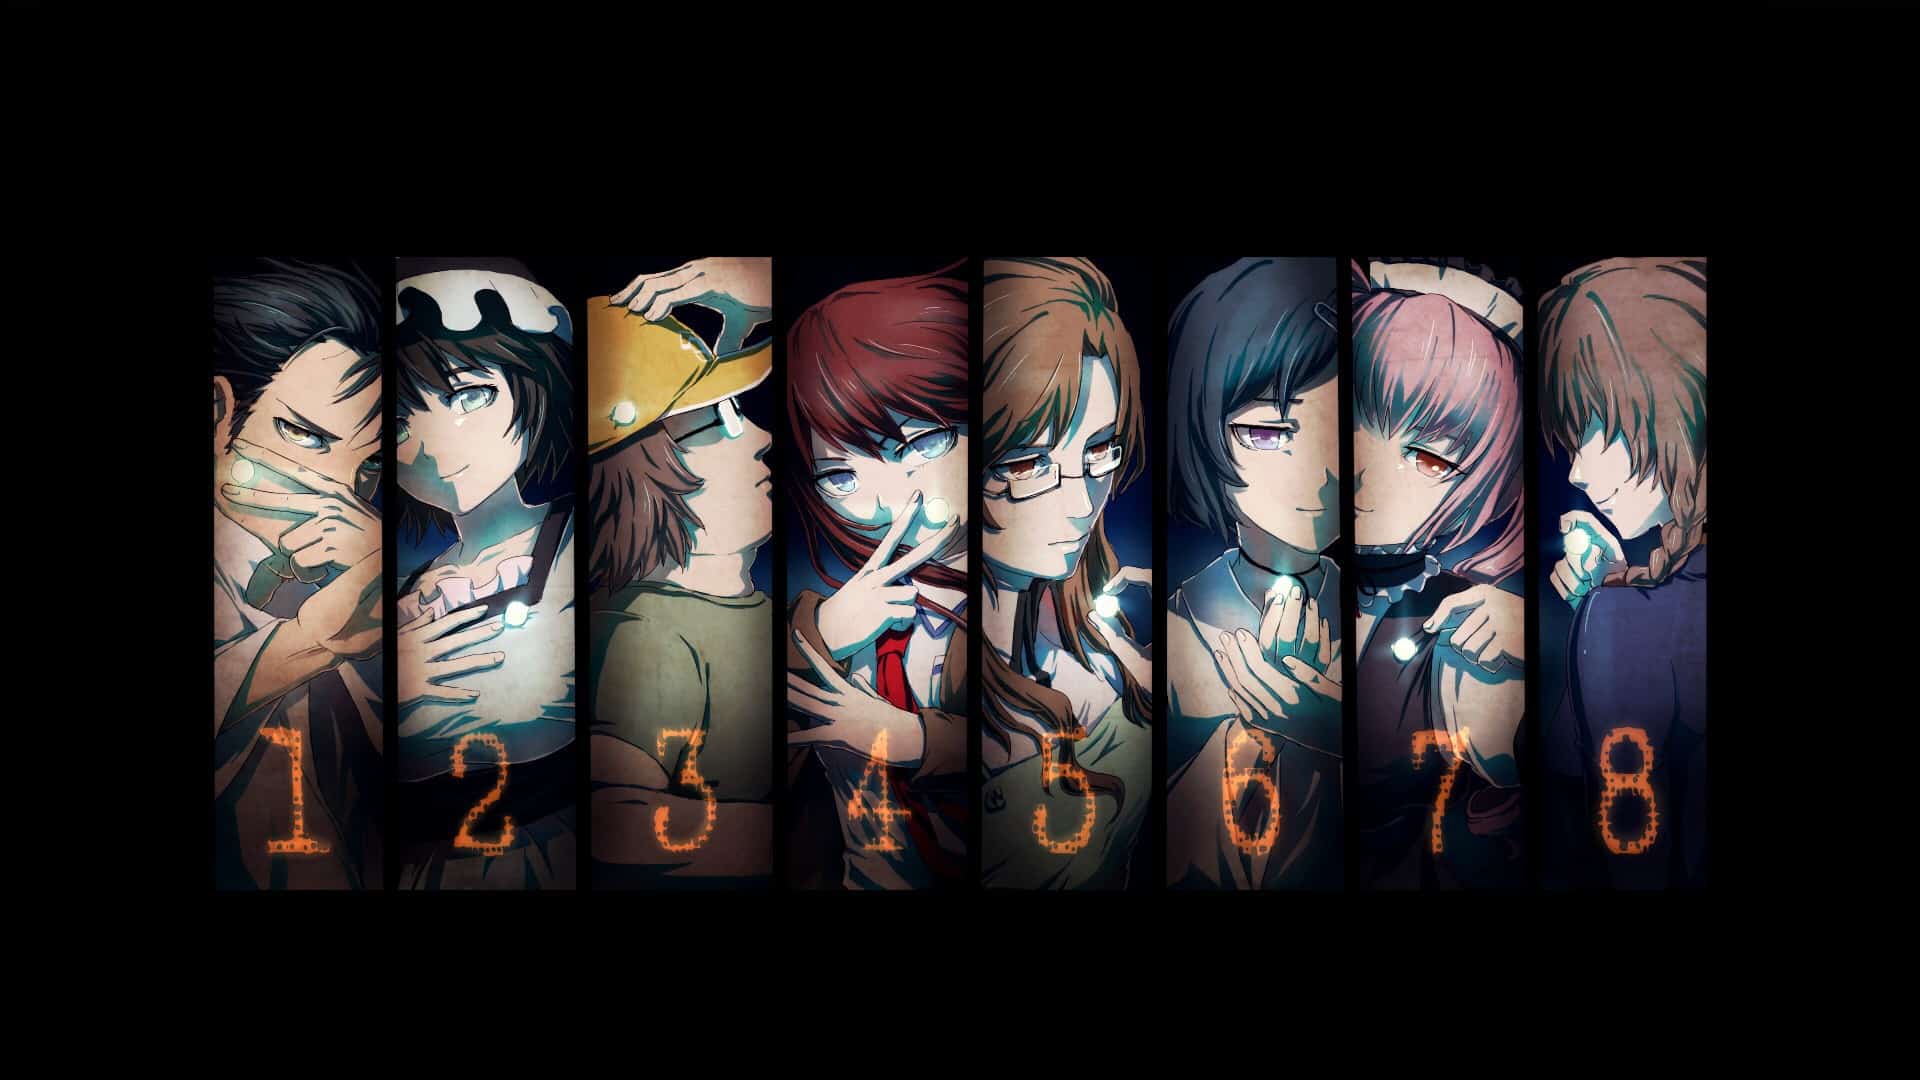 The characters of Steins Gate